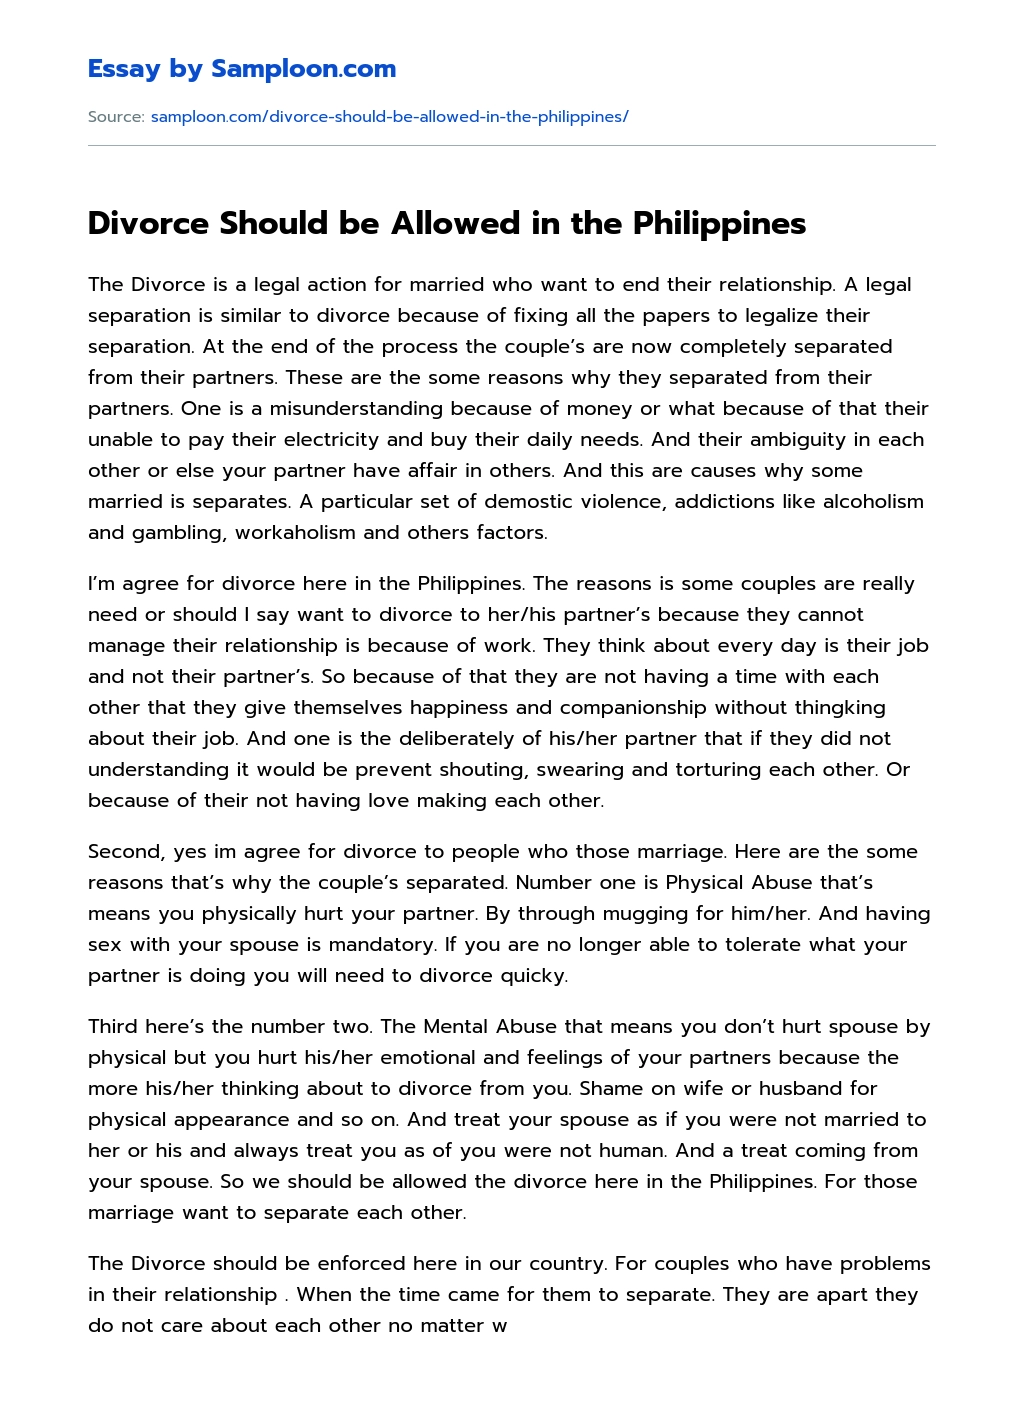 argumentative essay about divorce in the philippines